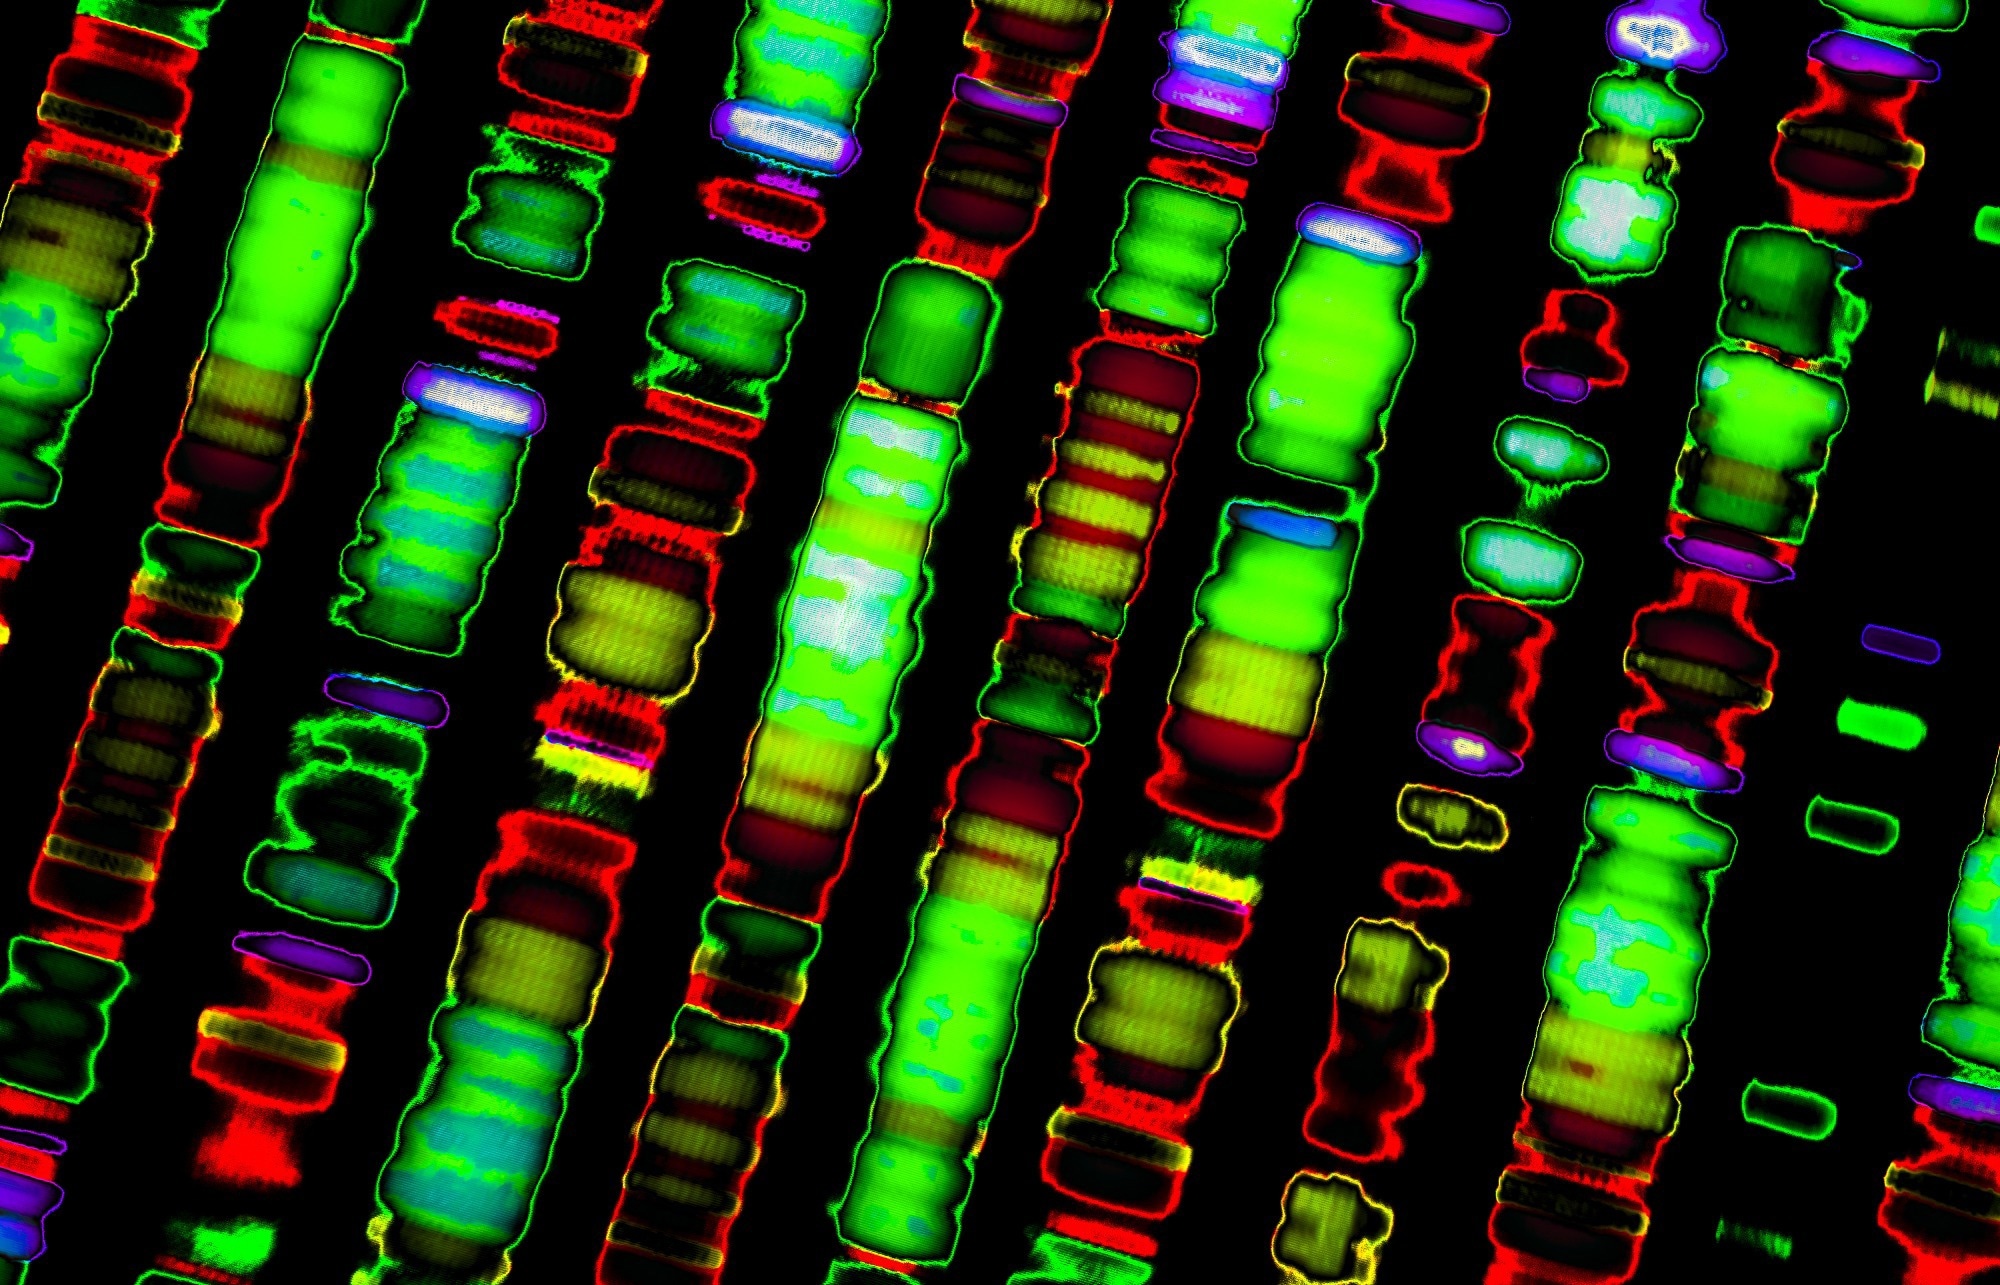 Study: A genomic mutational constraint map using variation in 76,156 human genomes. Image Credit: Gio.tto / Shutterstock